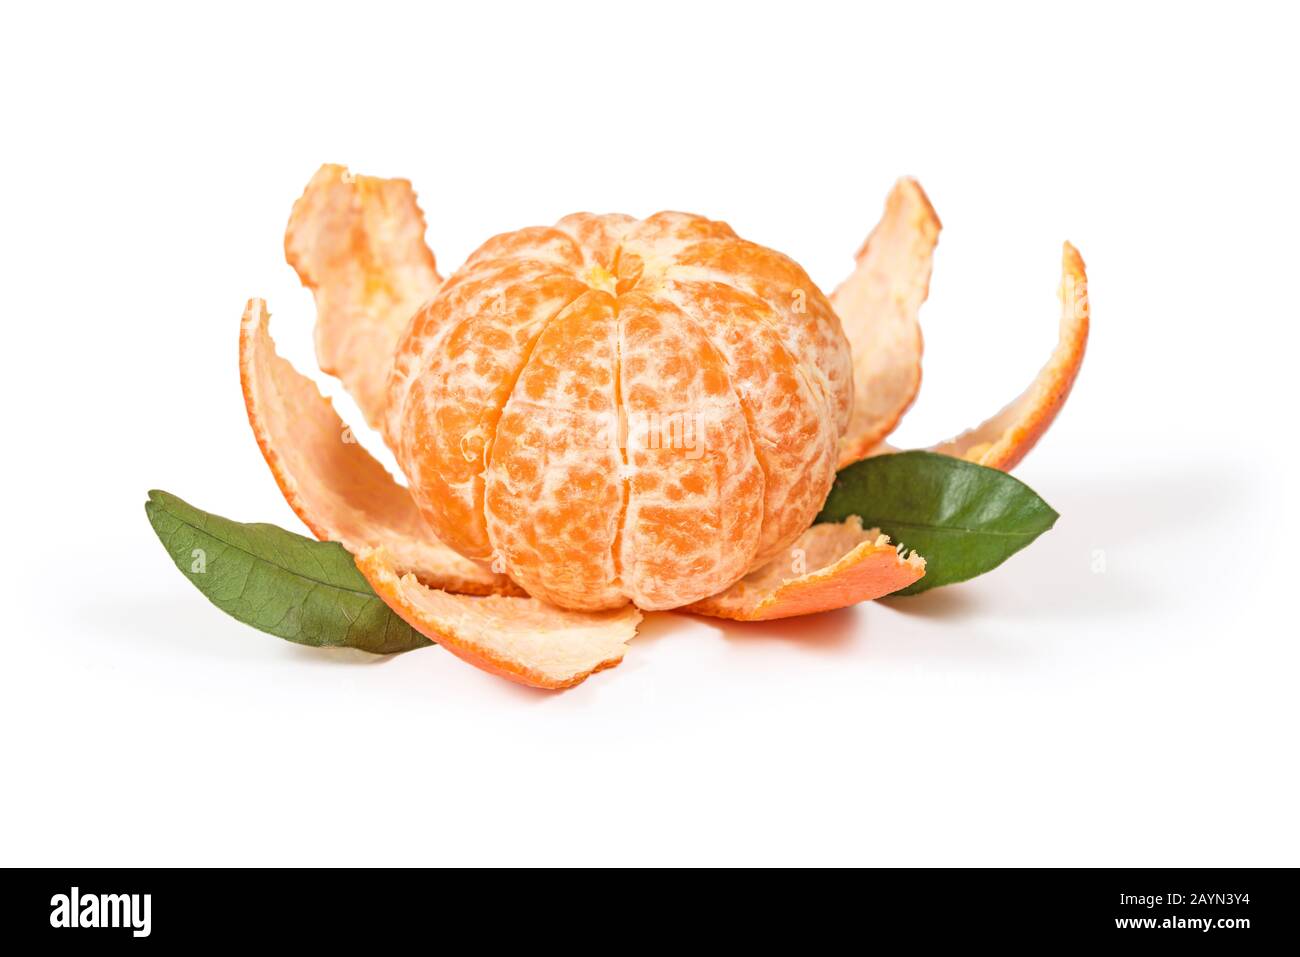 Peeled tangerine or mandarin fruit isolated on white background with clipping path Stock Photo